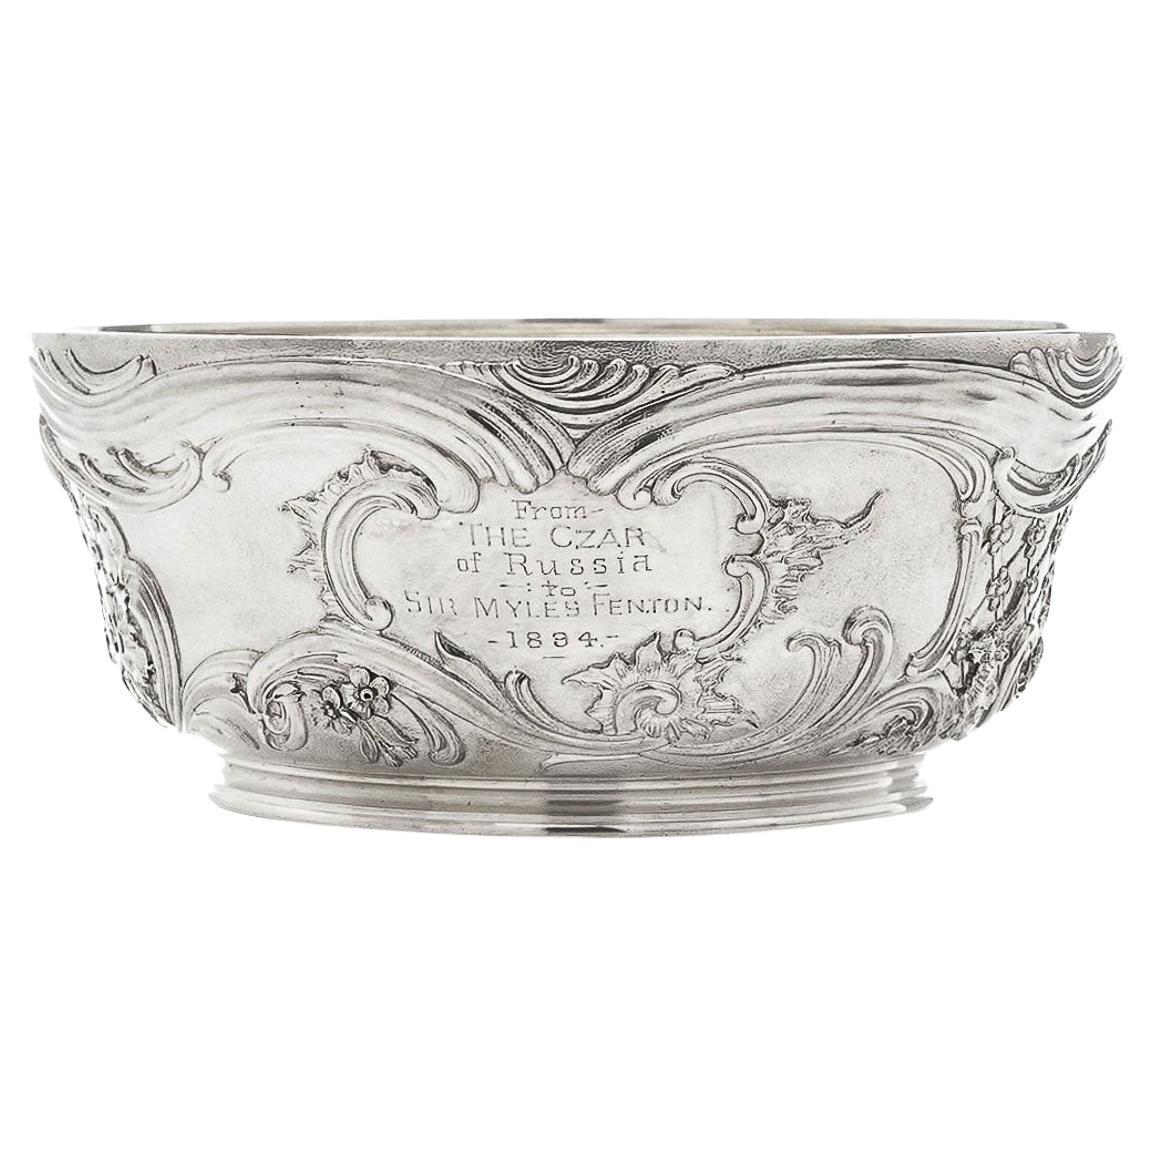 19th Century Imperial Russian Faberge Solid Silver Bowl, Rappoport, c.1894